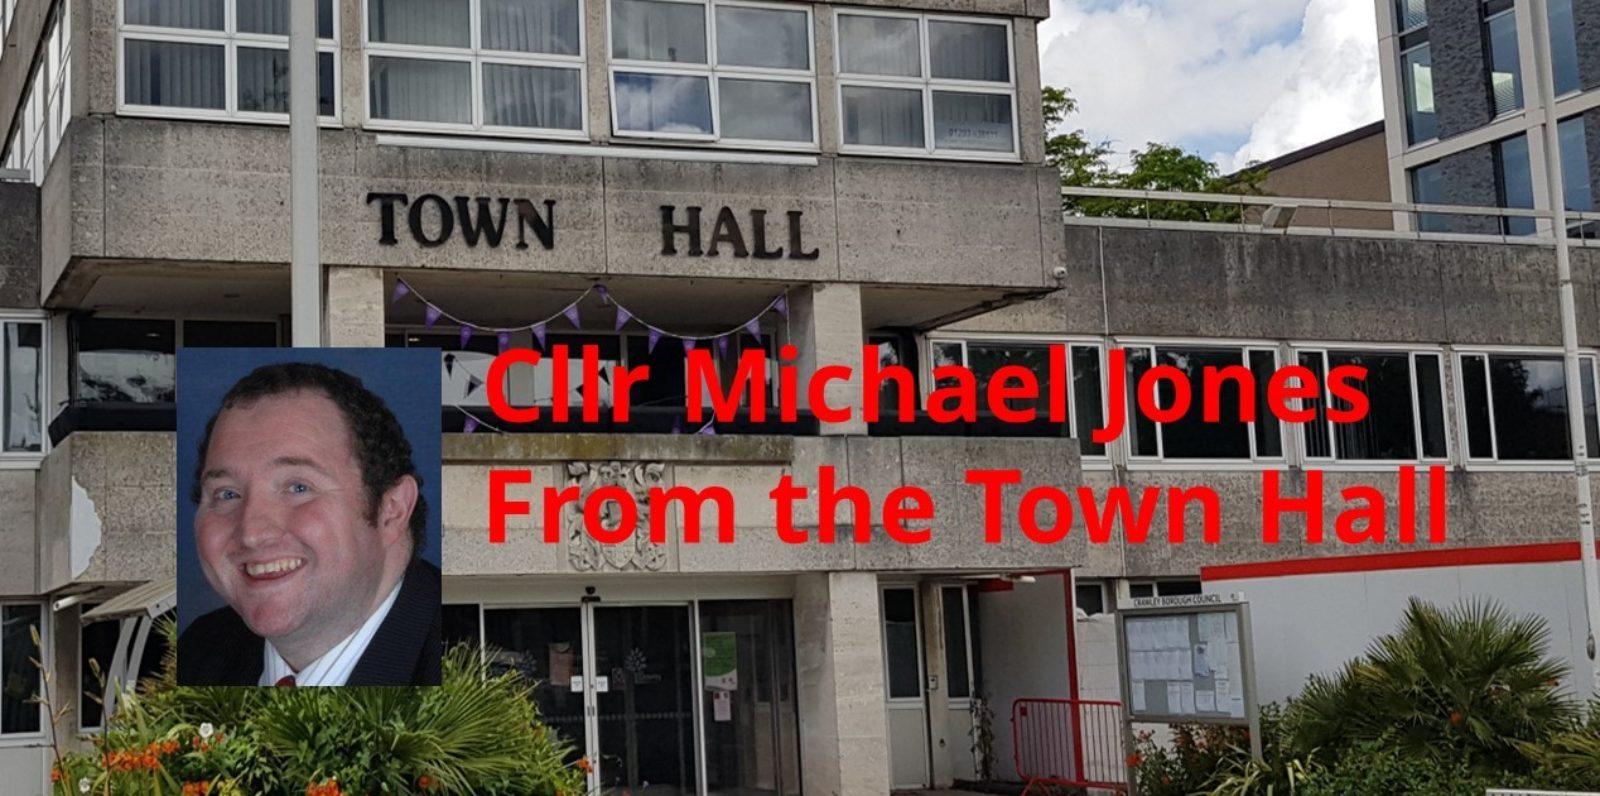 Cllr Michael Jones - From the Town Hall